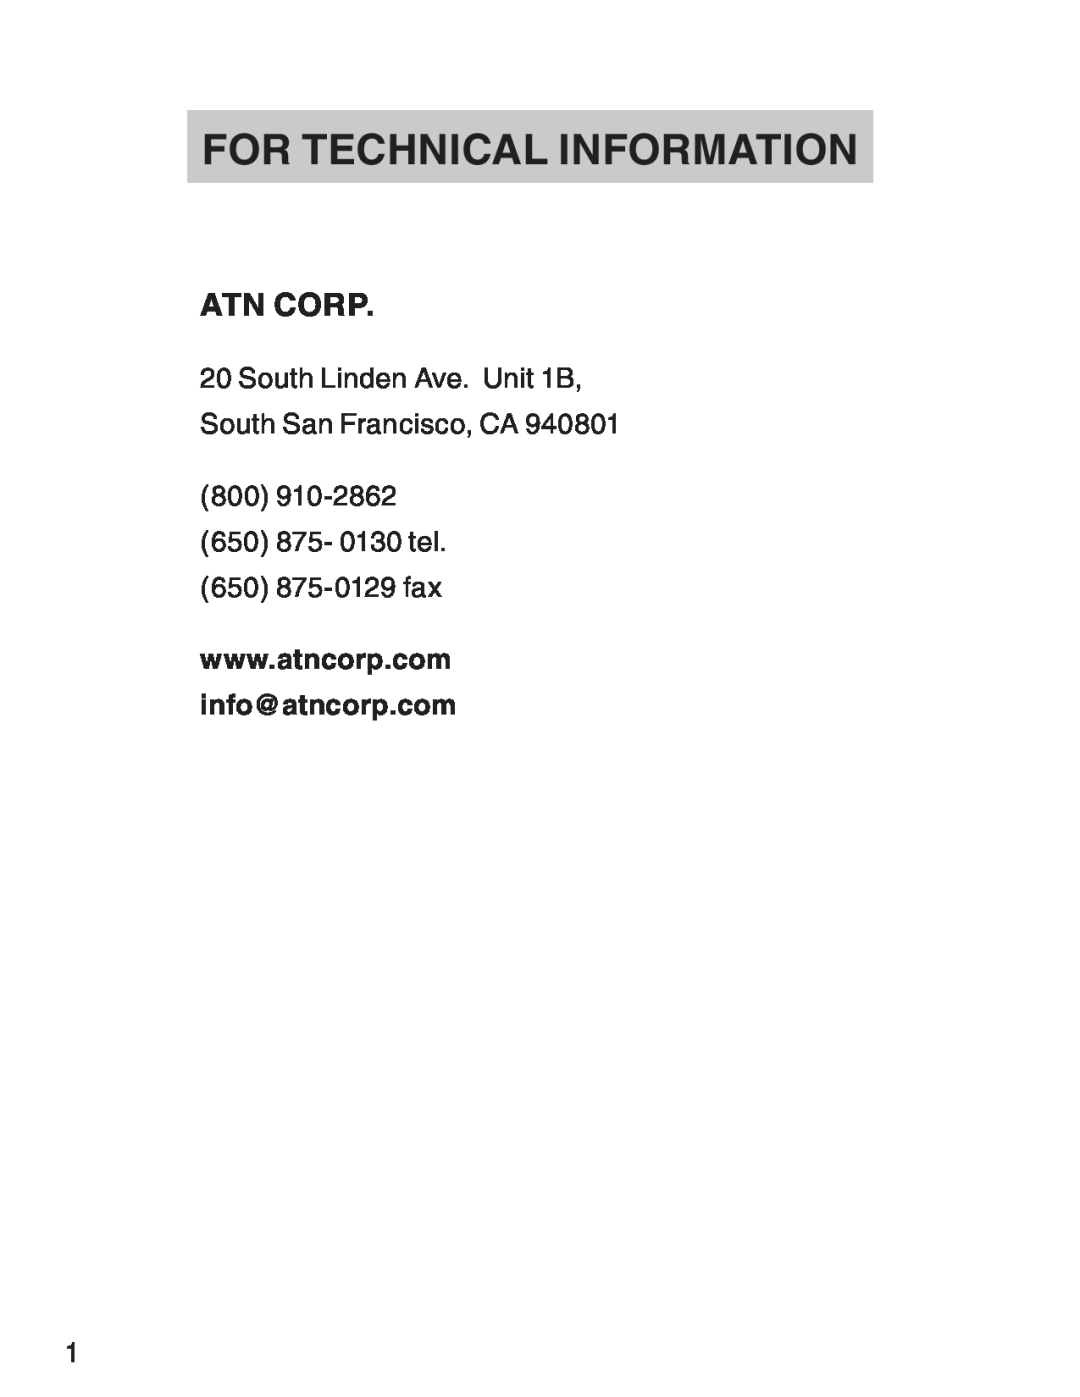 ATN 3 manual For Technical Information, ATN Corp, info@atncorp.com 